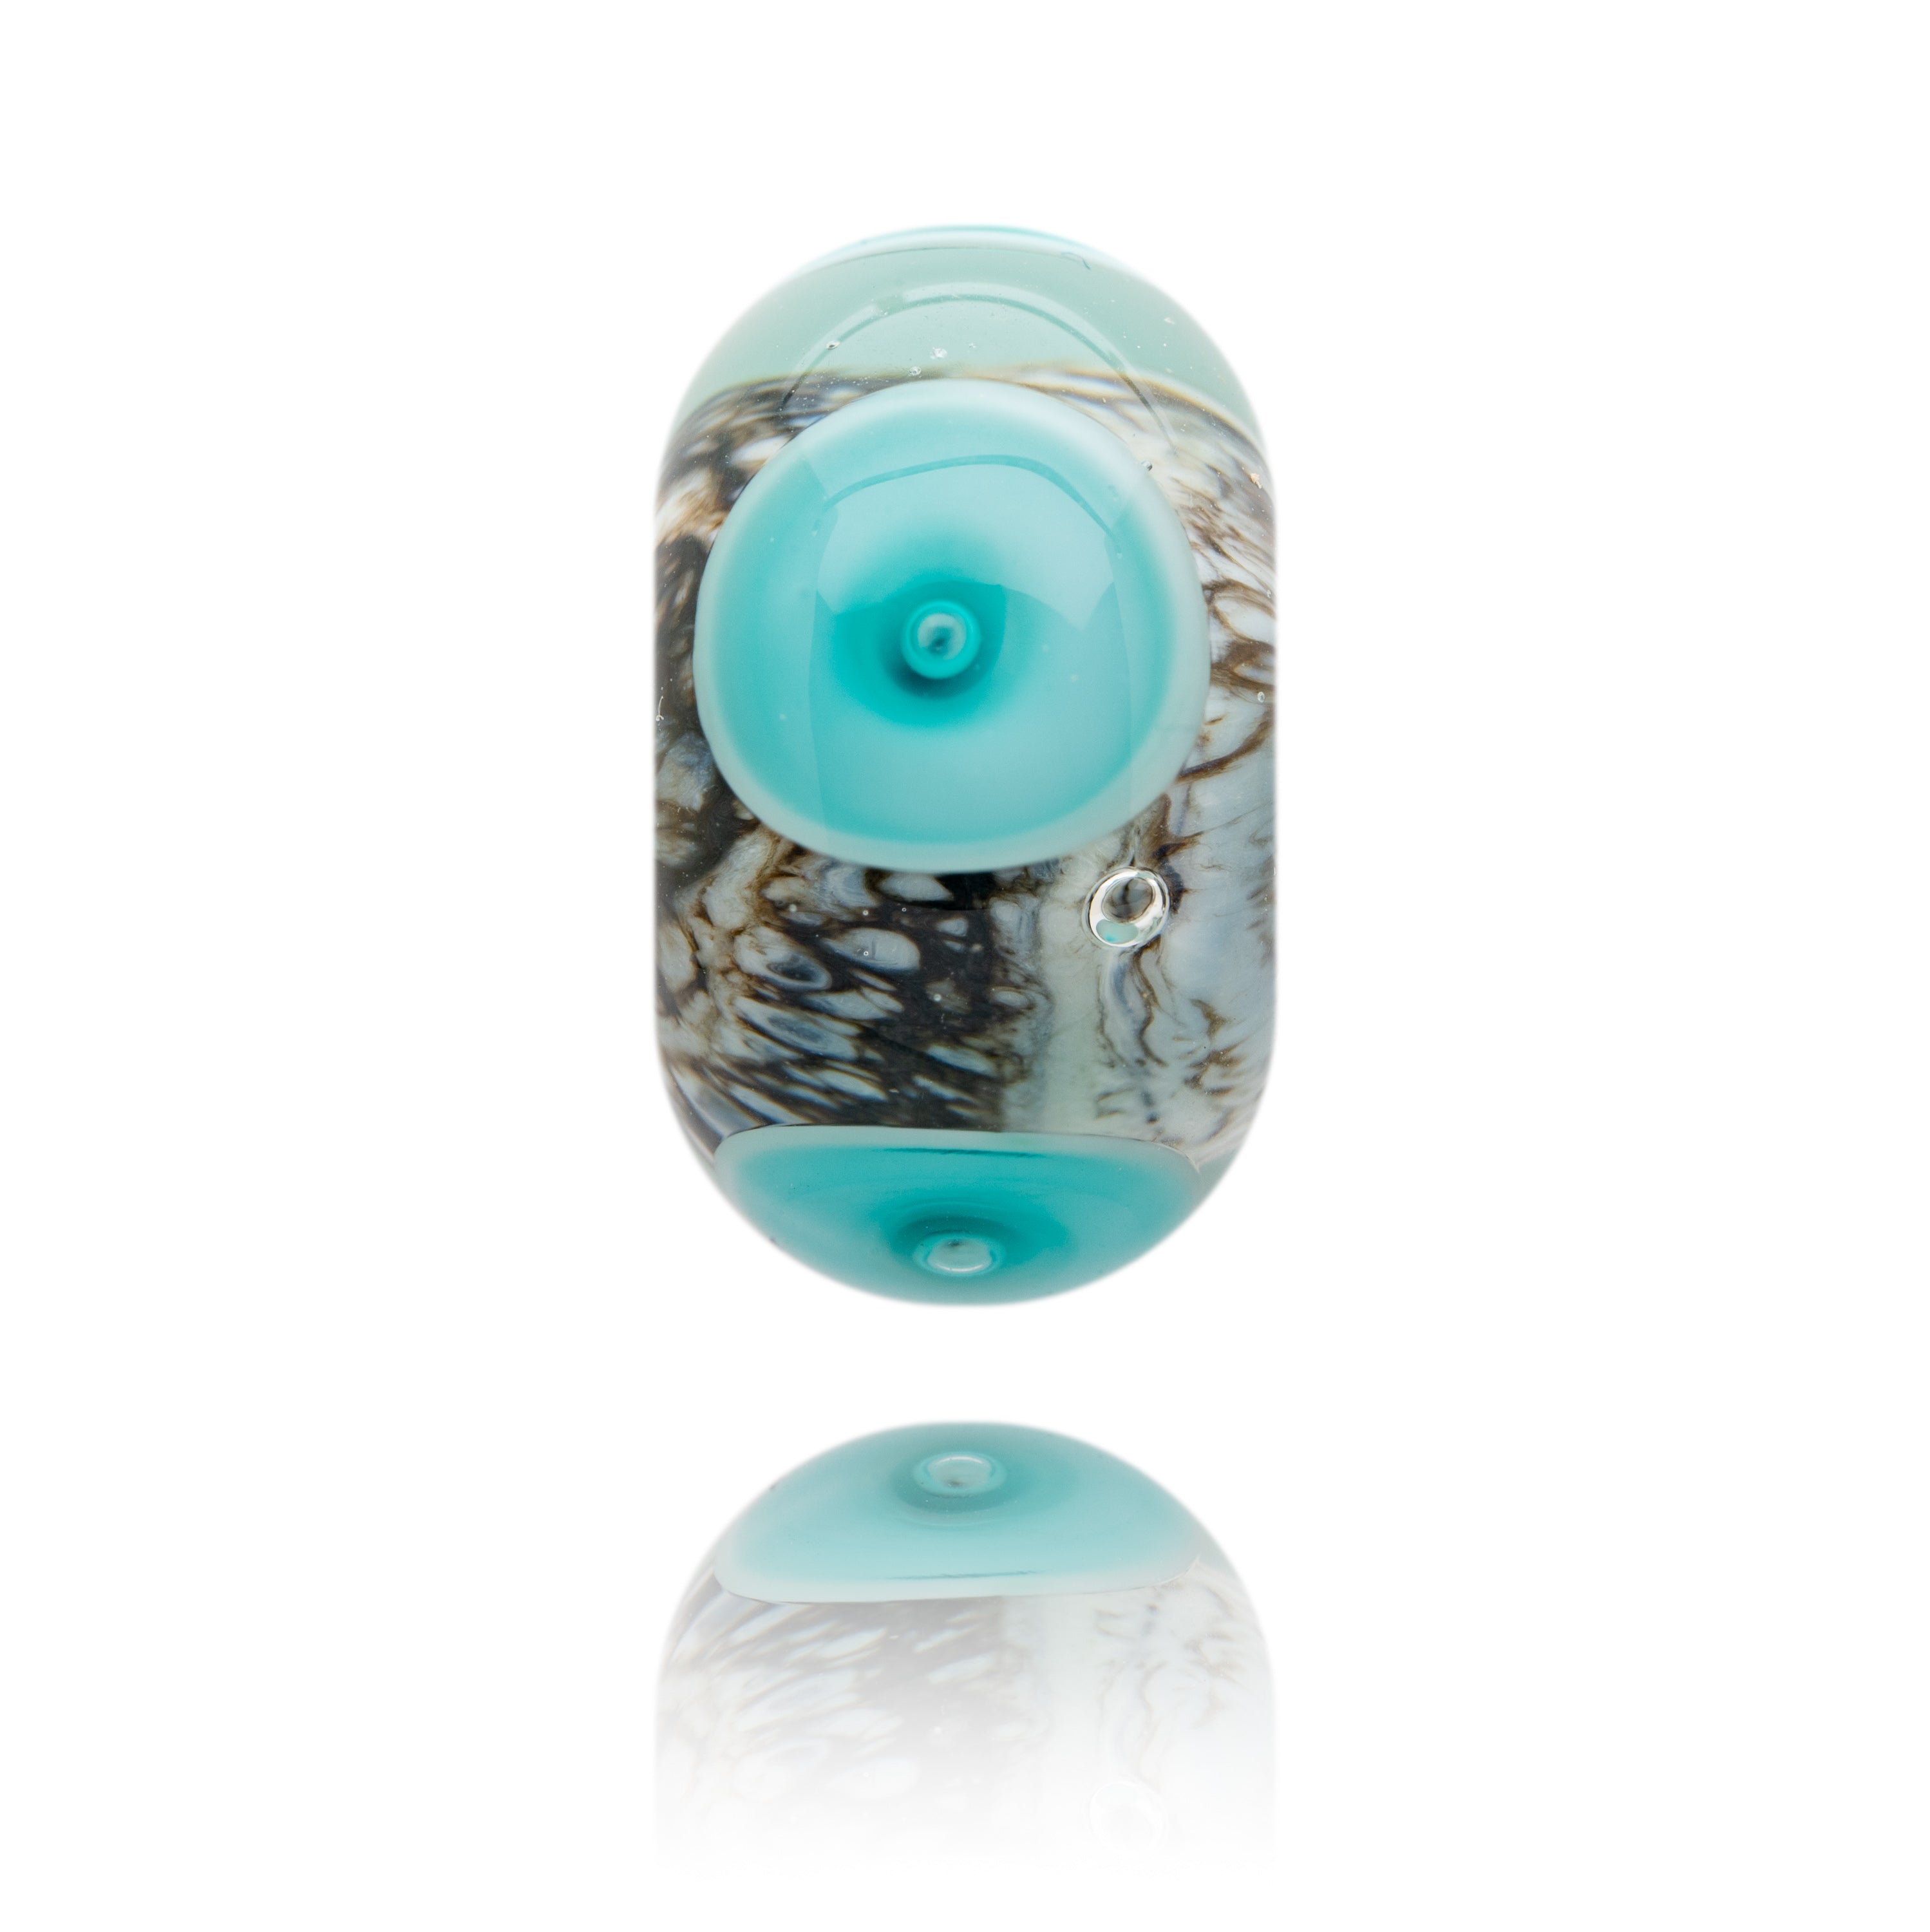 Glass bead representing Summerleaze beach in Bude, Cornwall. Made with Brown core and turquoise dots on the surface.